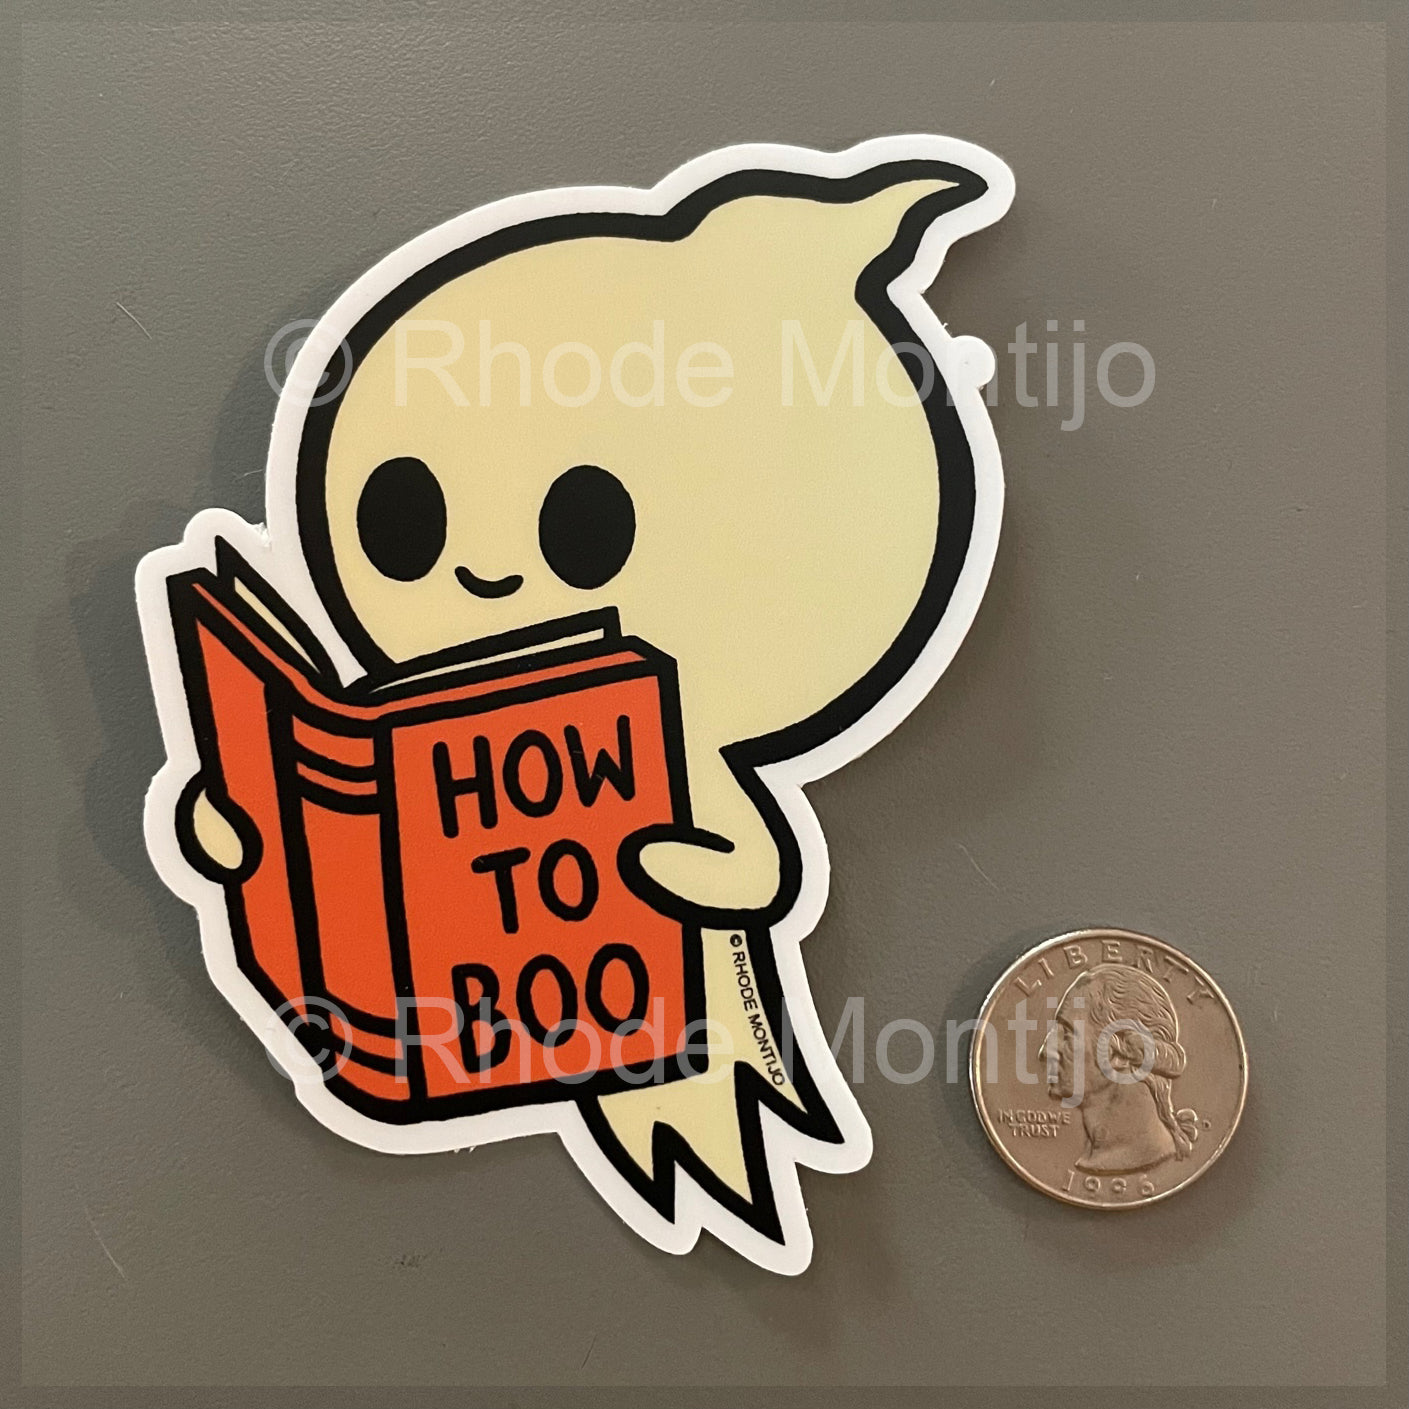 .New Sticker: HOW TO BOO